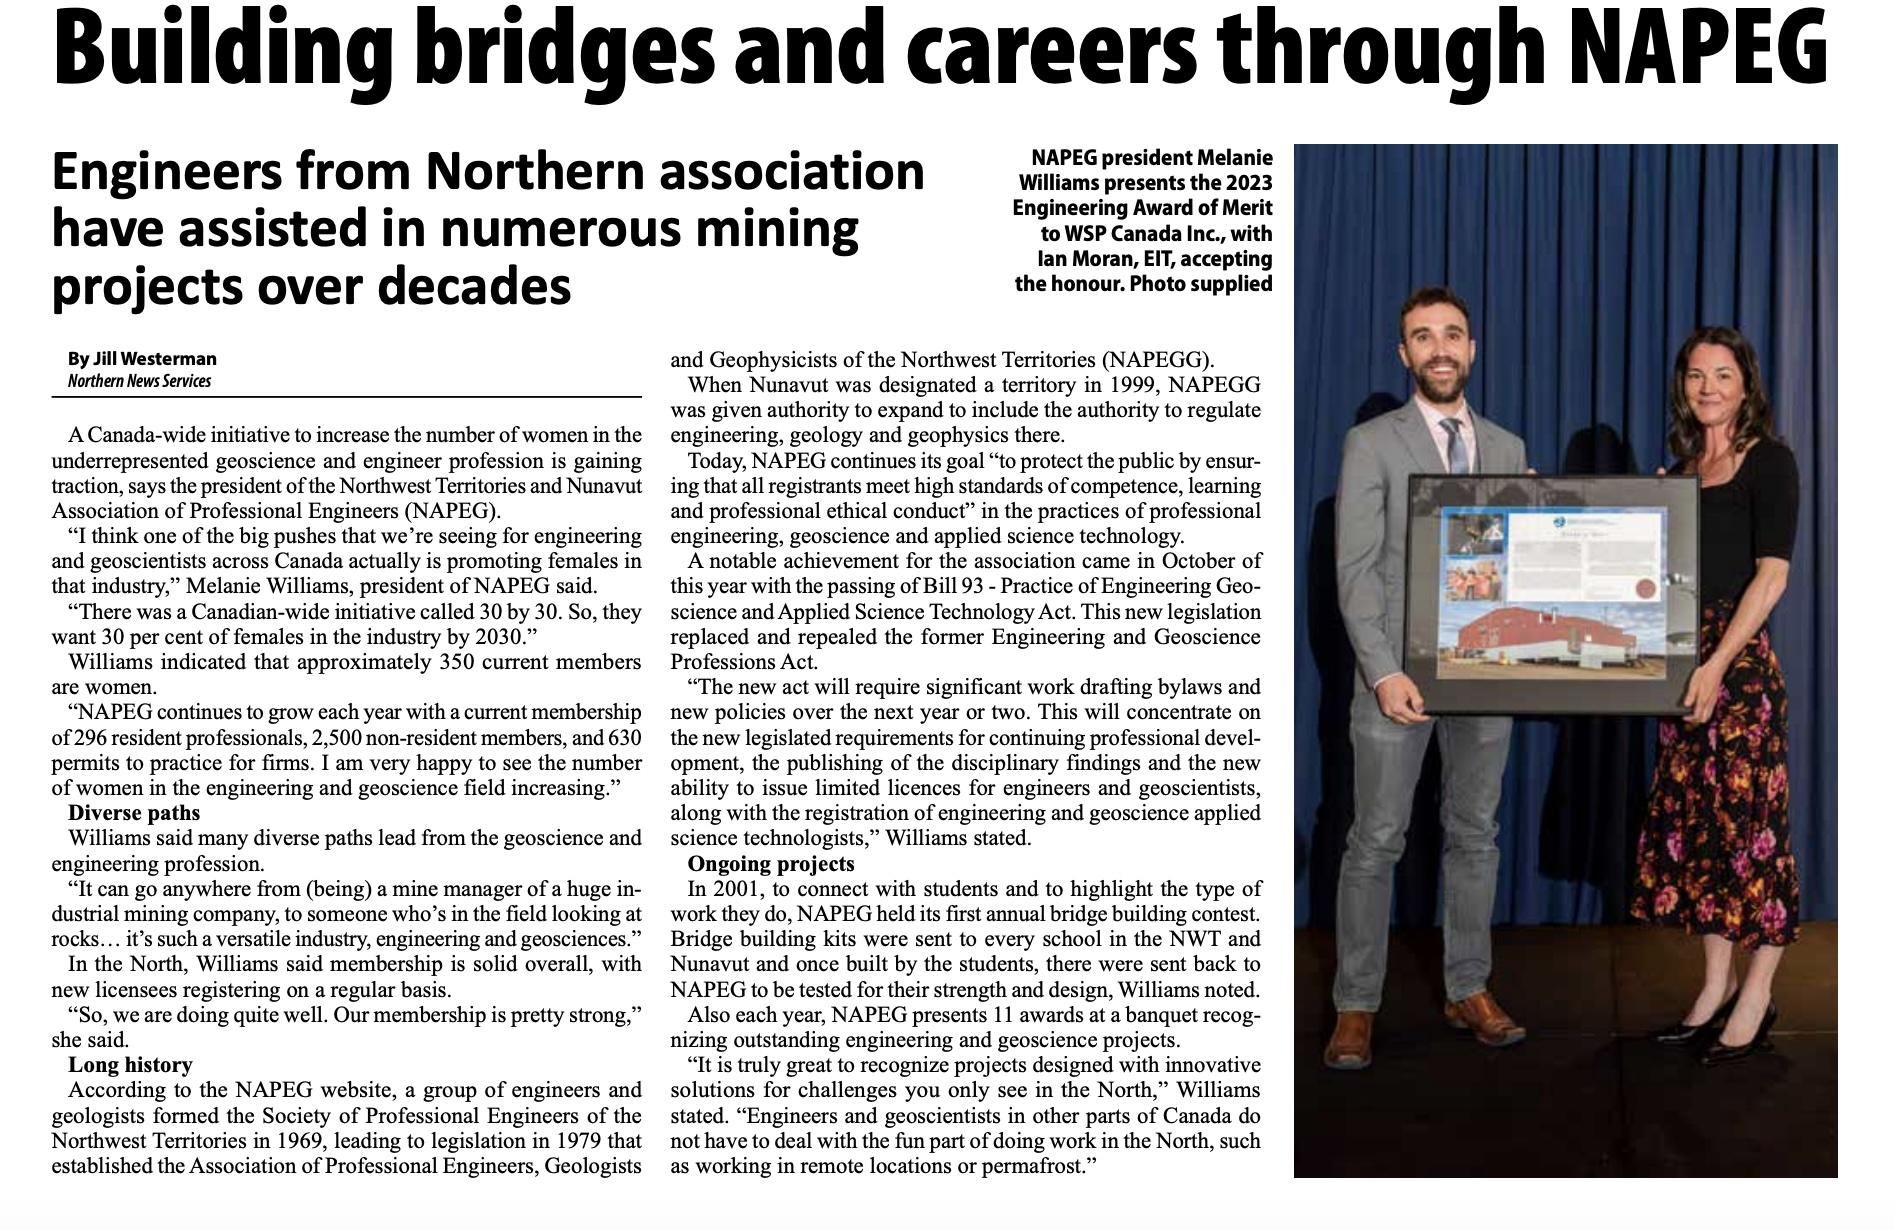 A screenshot of an article in NNS titled "Building Bridges and Careers through NAPEG." Link to the article below.